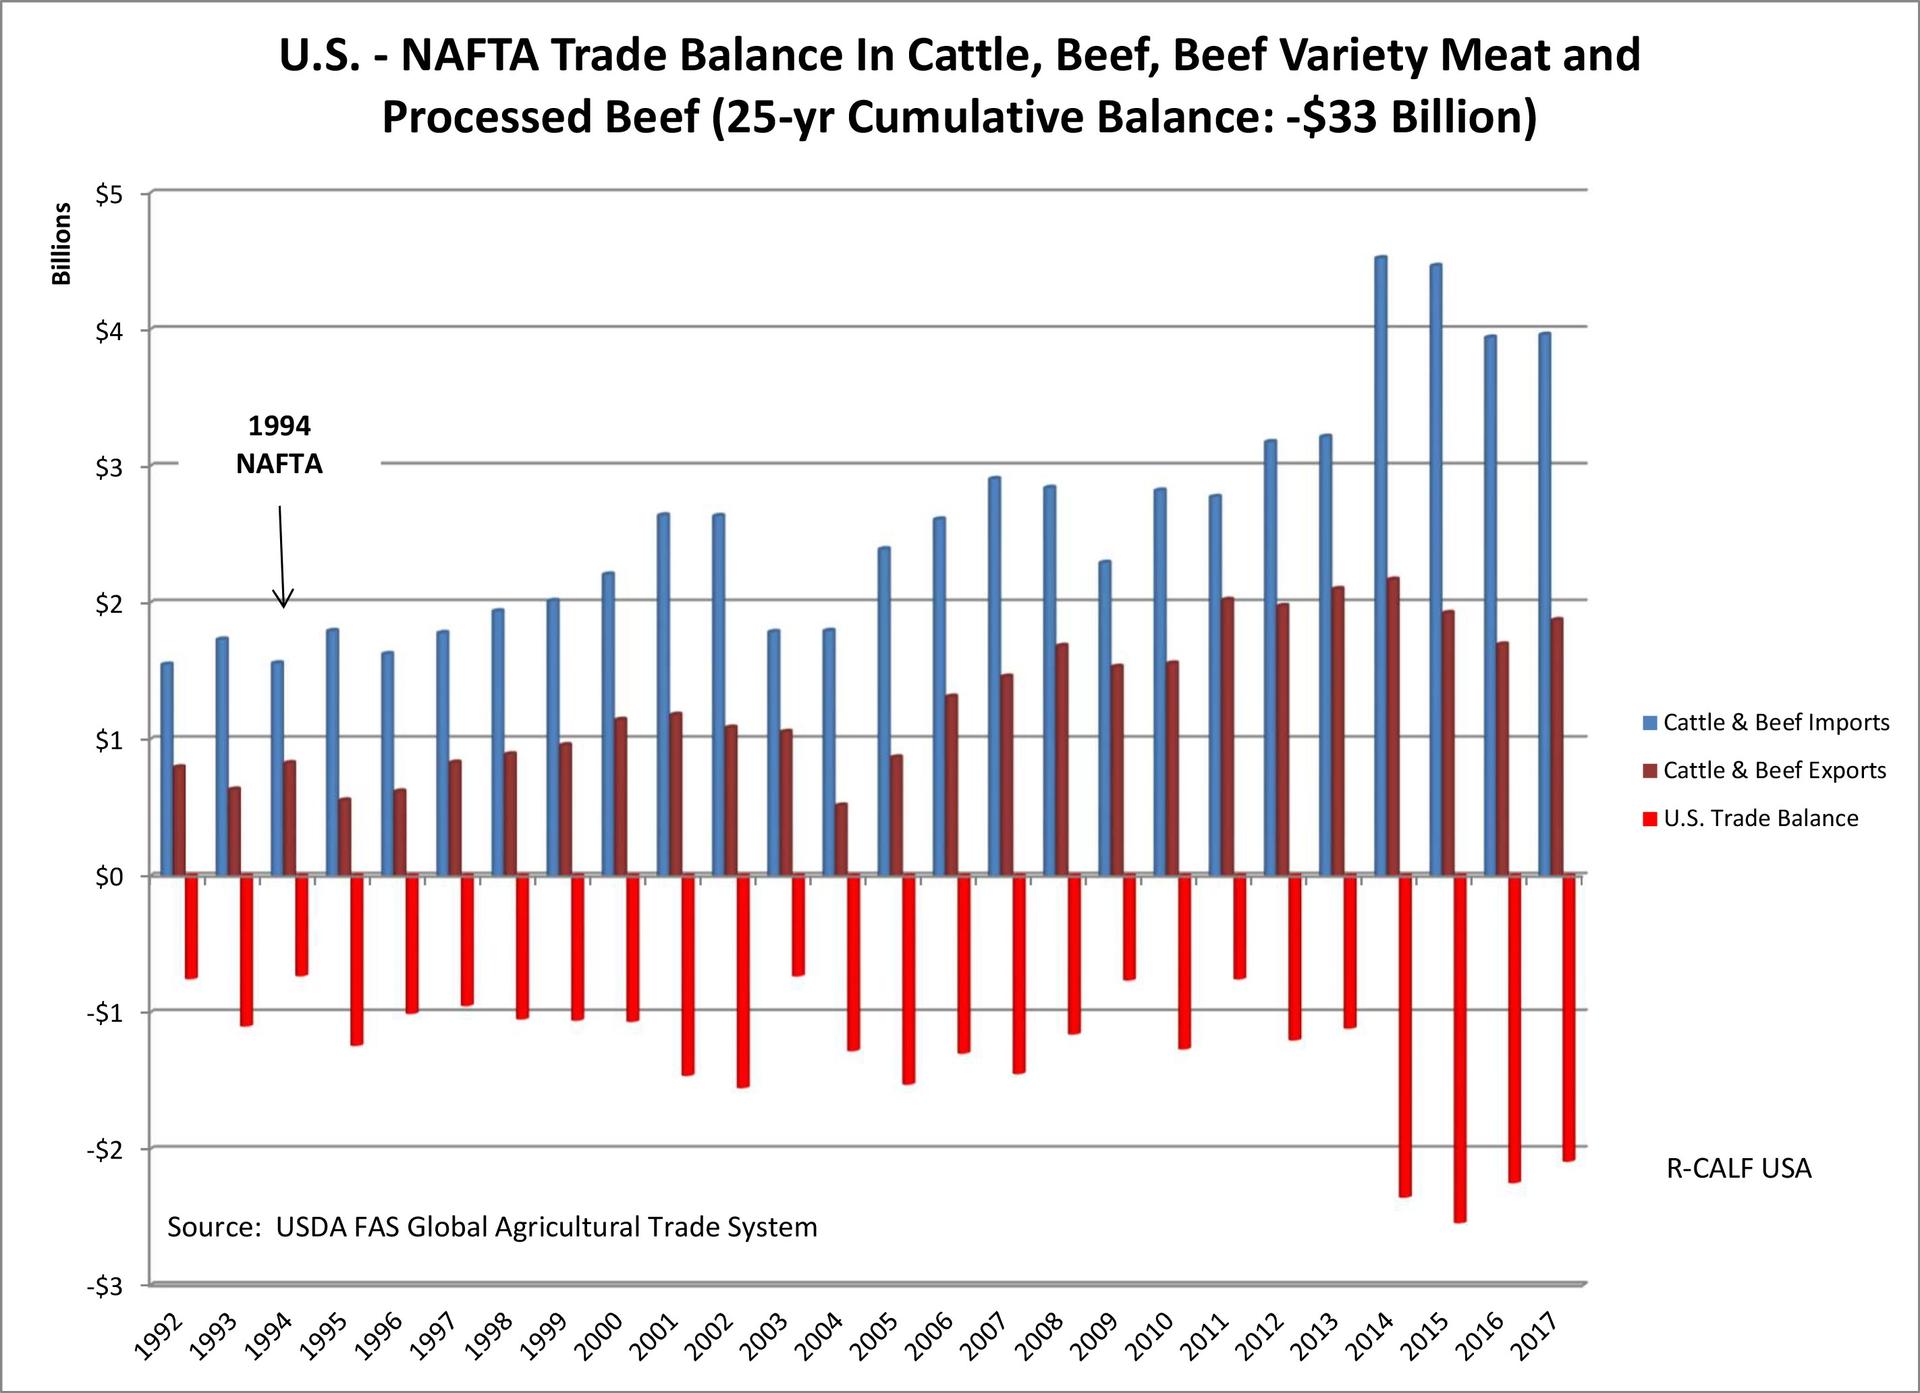 US-NAFTA trade balance in cattle, beef, beef variety meat and processed beef (25-year cumulative balance- $33 billion)